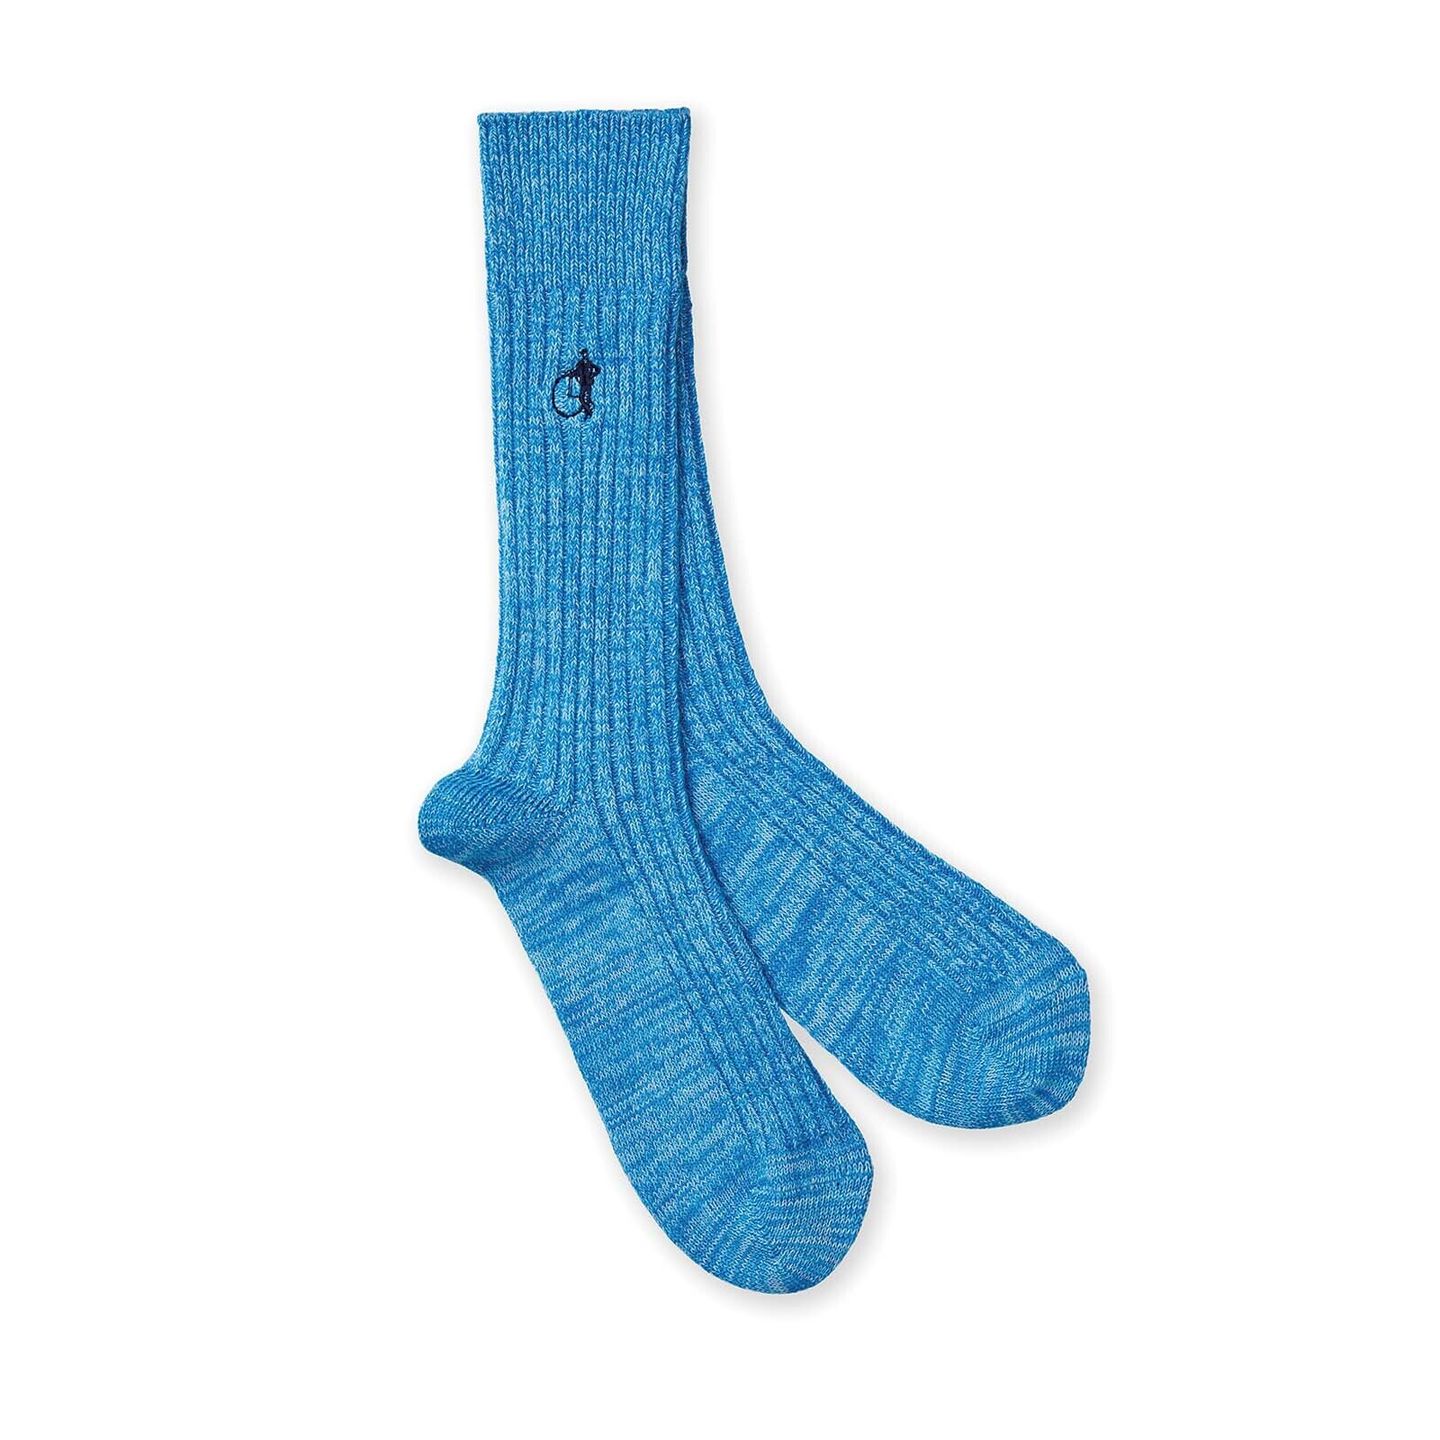 Boot Socks In A Turquoise colour with London Sock Company logo embroidered